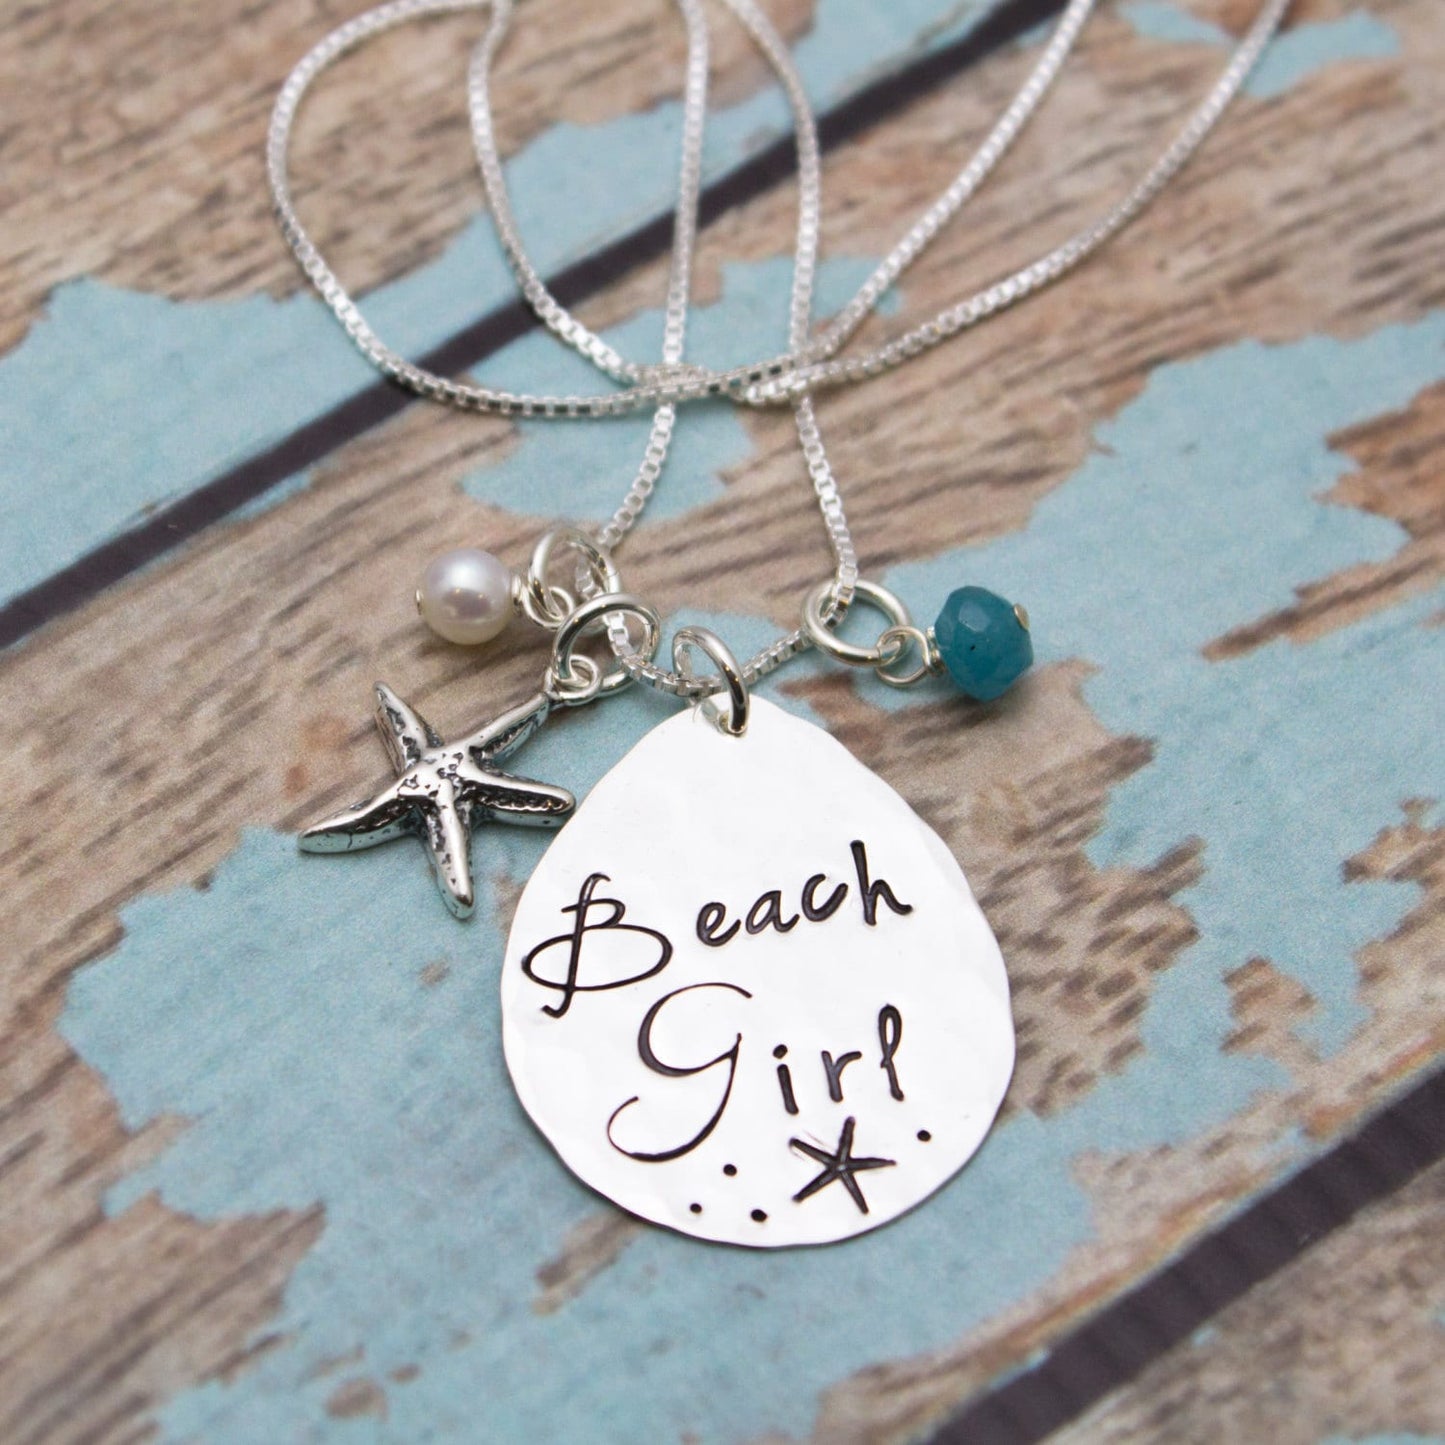 BEACH GIRL Necklace, Starfish Necklace, Beach Jewelry, Stamped Necklace, Pearl, Aqua Bead, Hand Stamped Jewelry